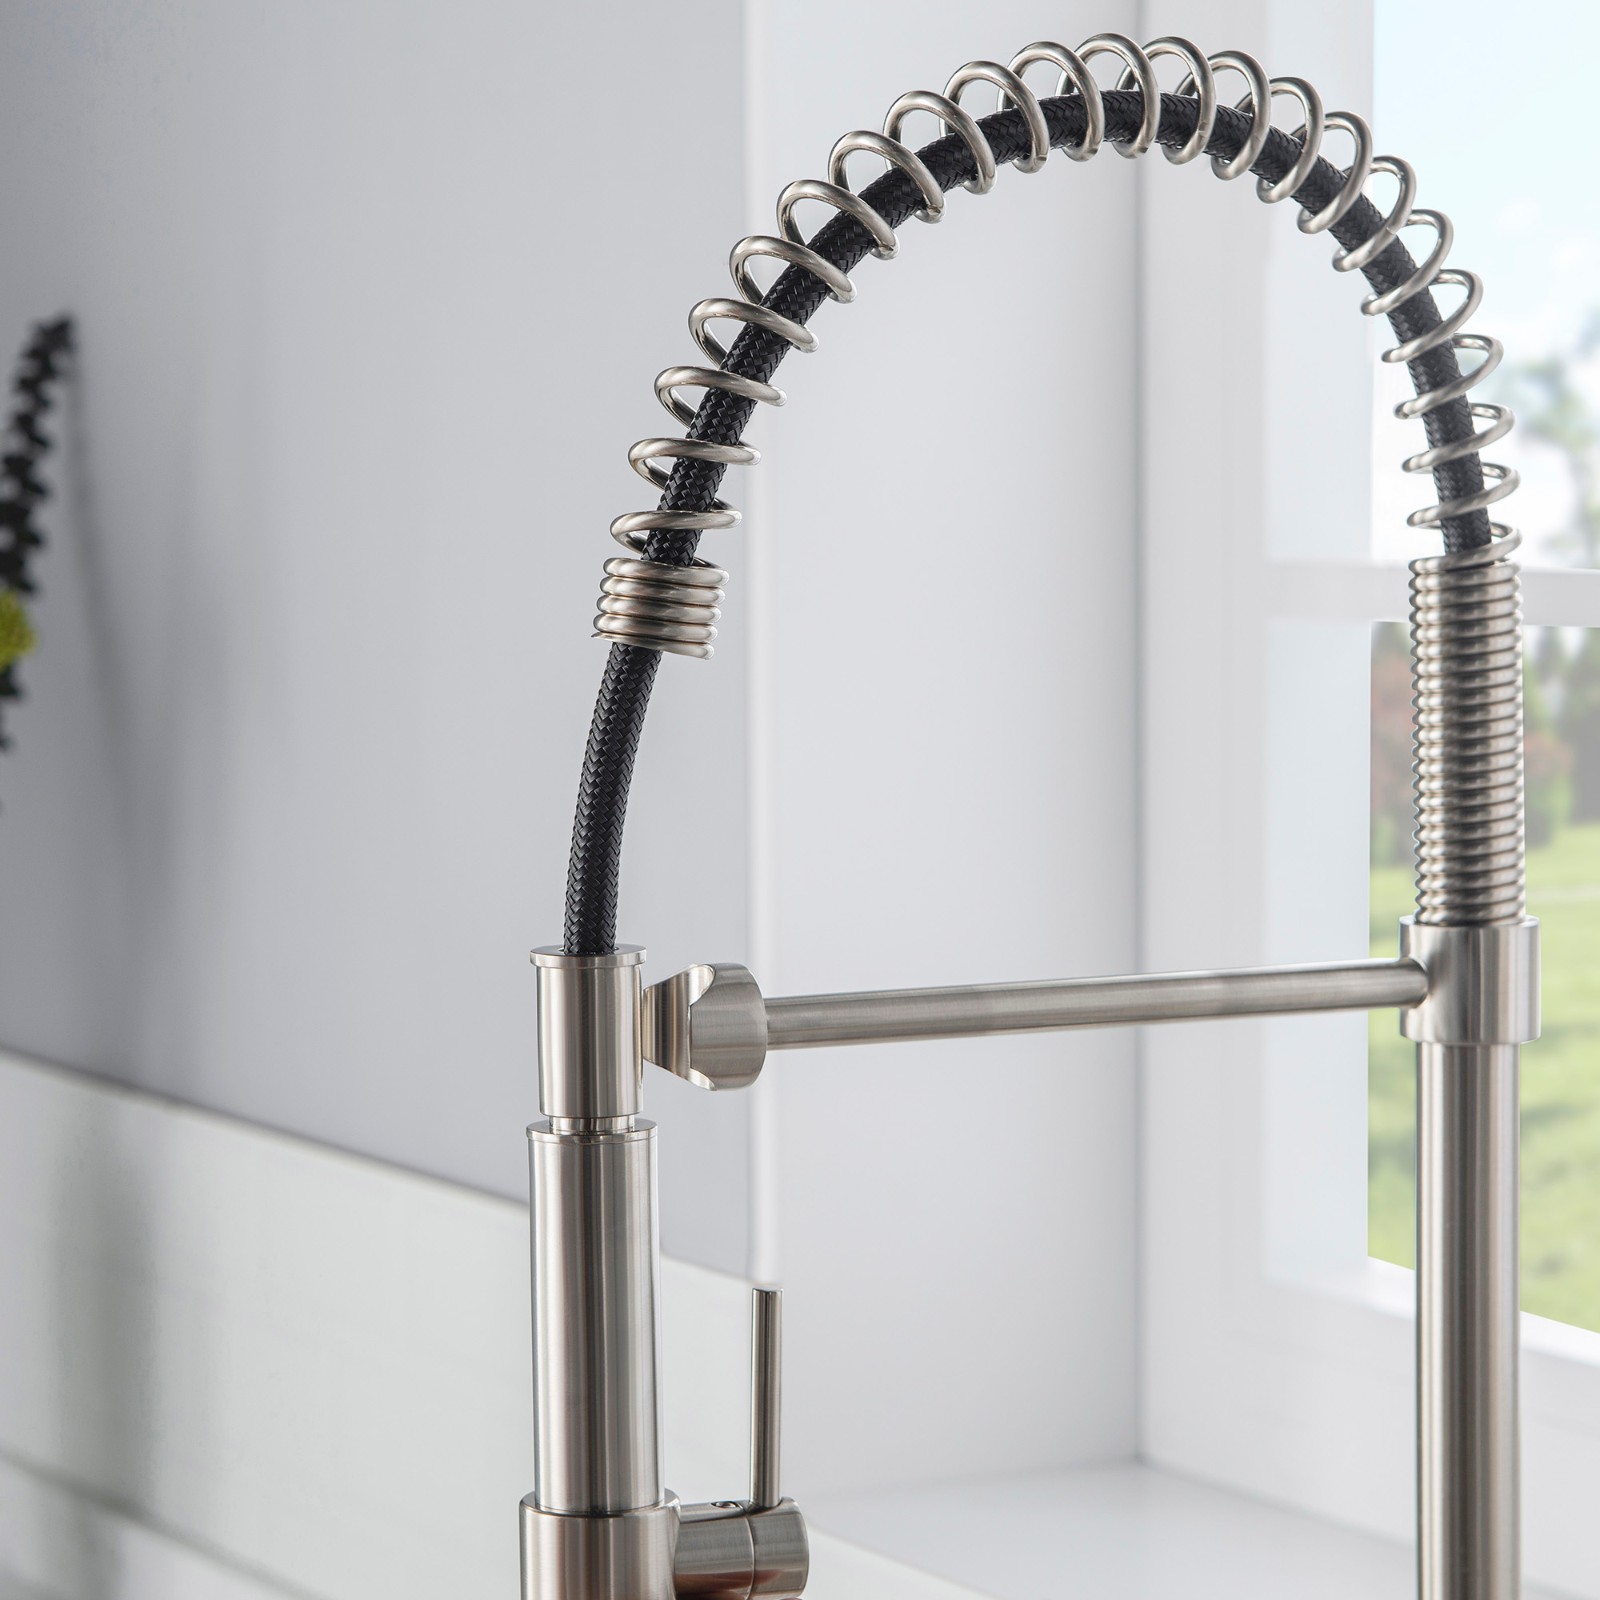  WOODBRIDGE WK060501BN Stainless Steel Single Handle Pre-Rinse Pull Down Kitchen Faucet and Pot Filler in Brushed Nickel Finish._5244